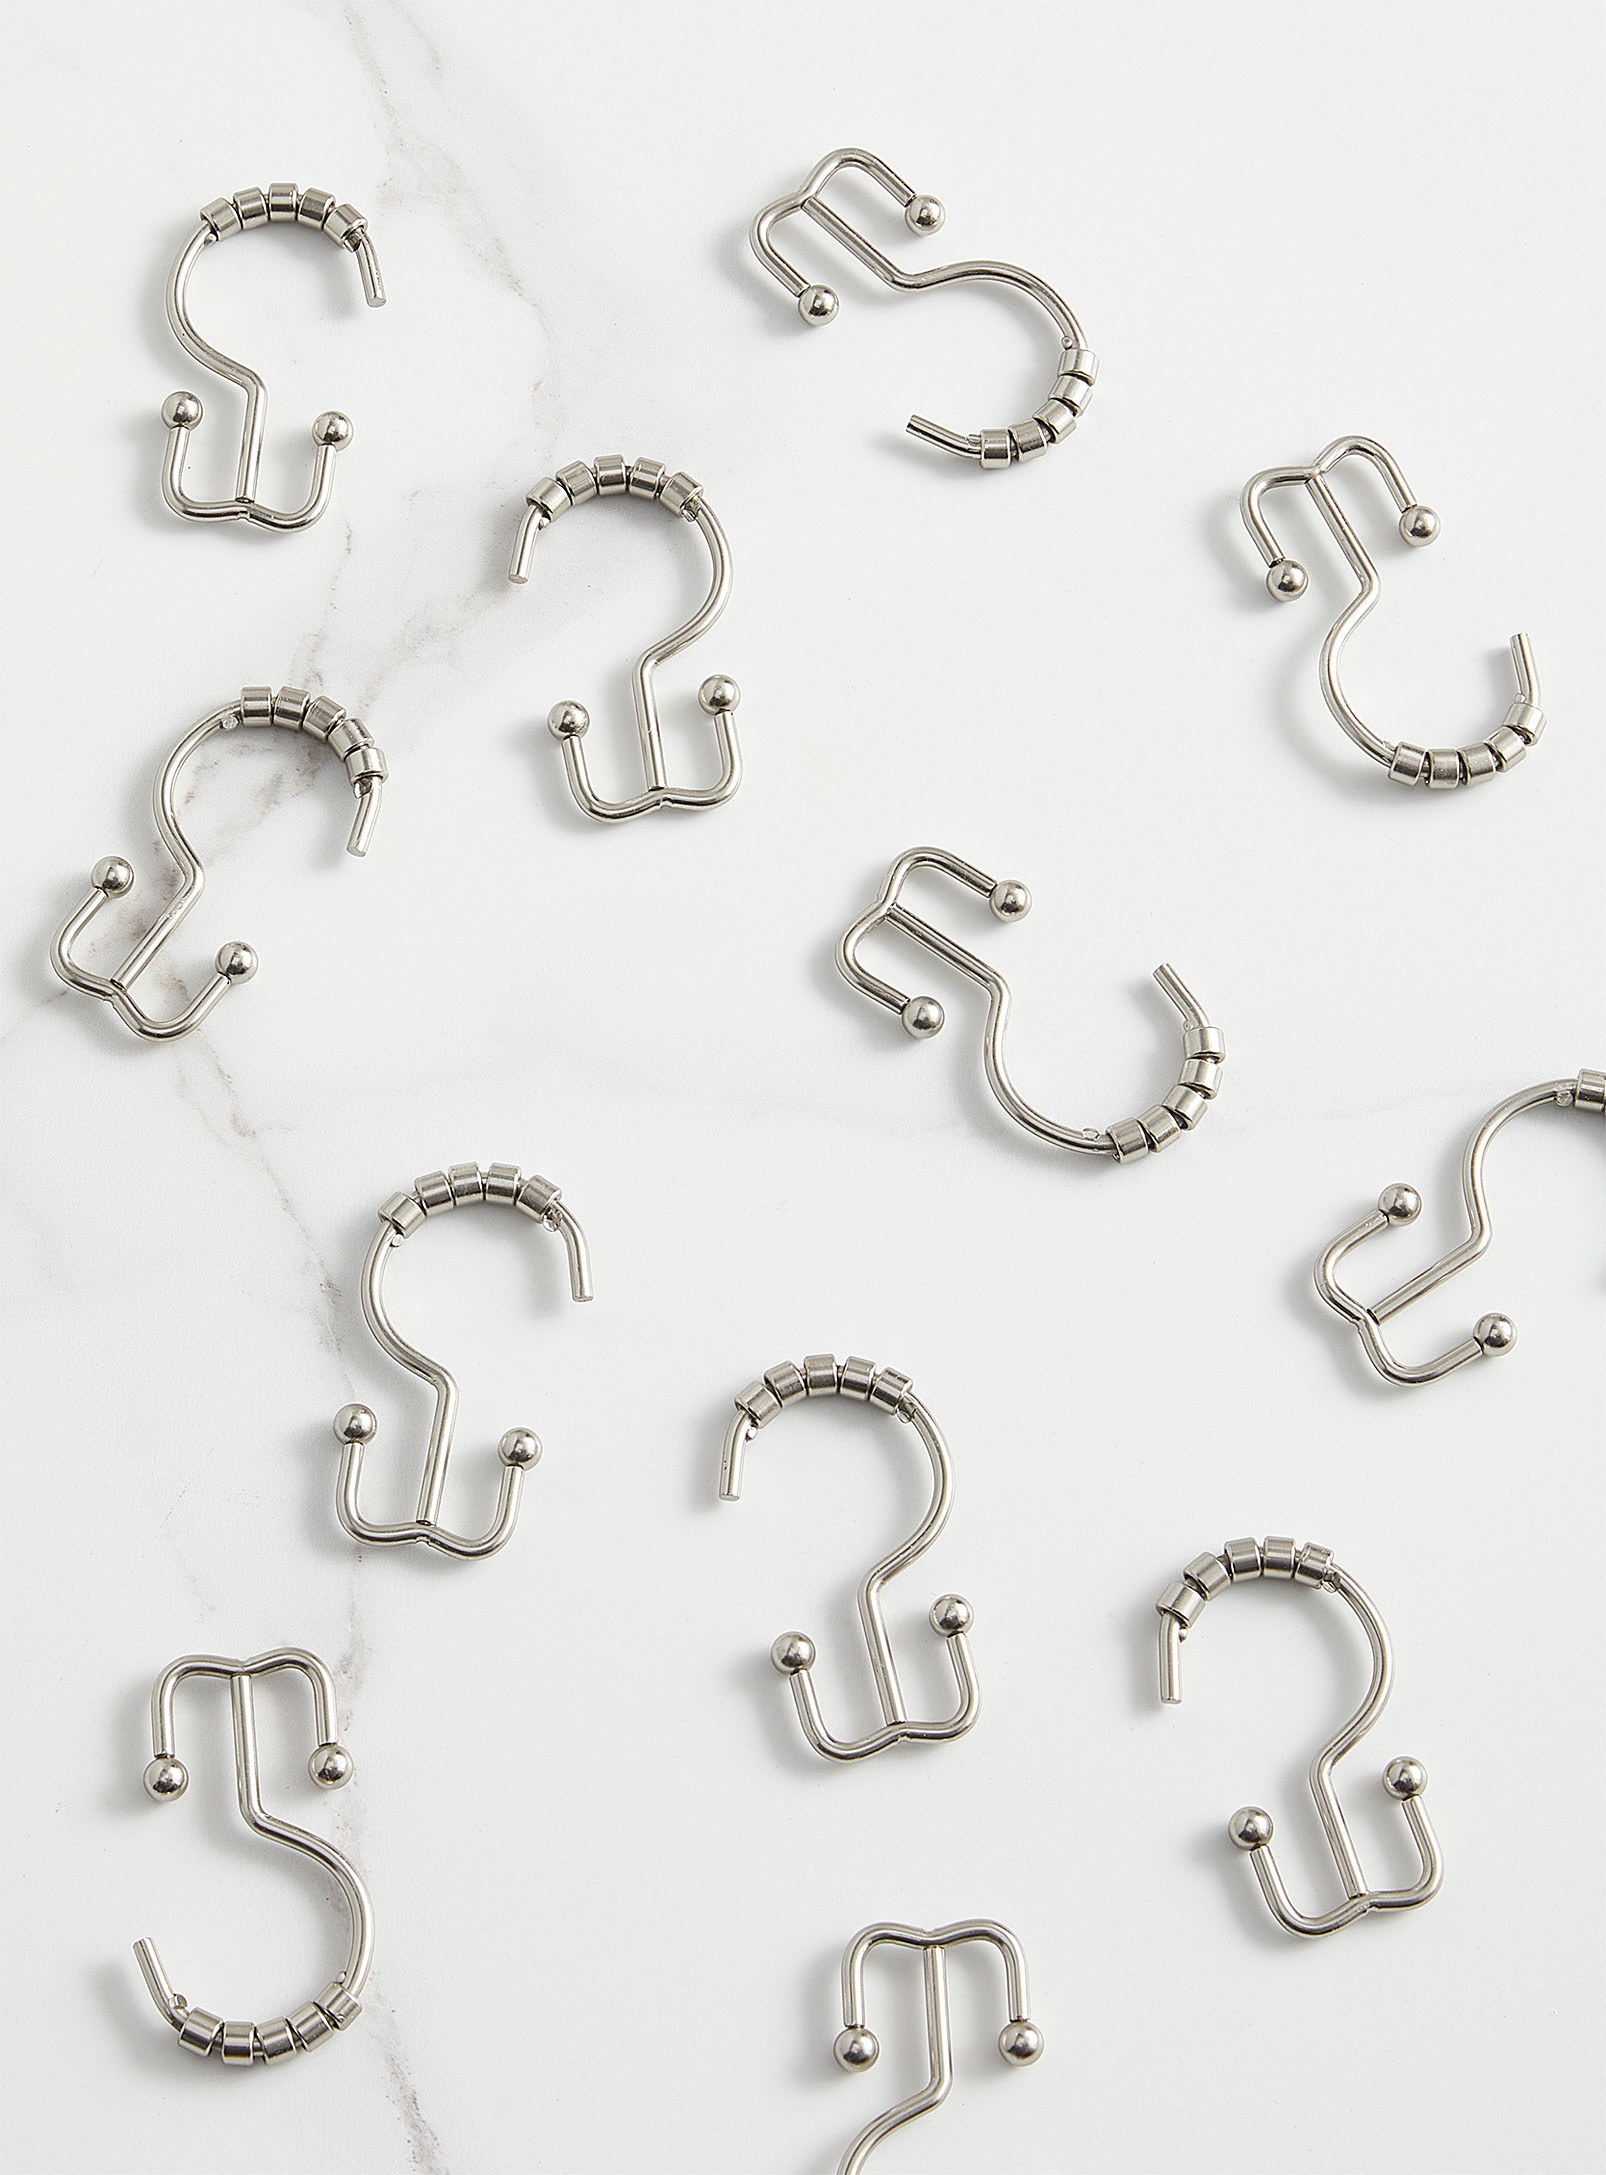 A bunch of shower curtain hooks on a plain background